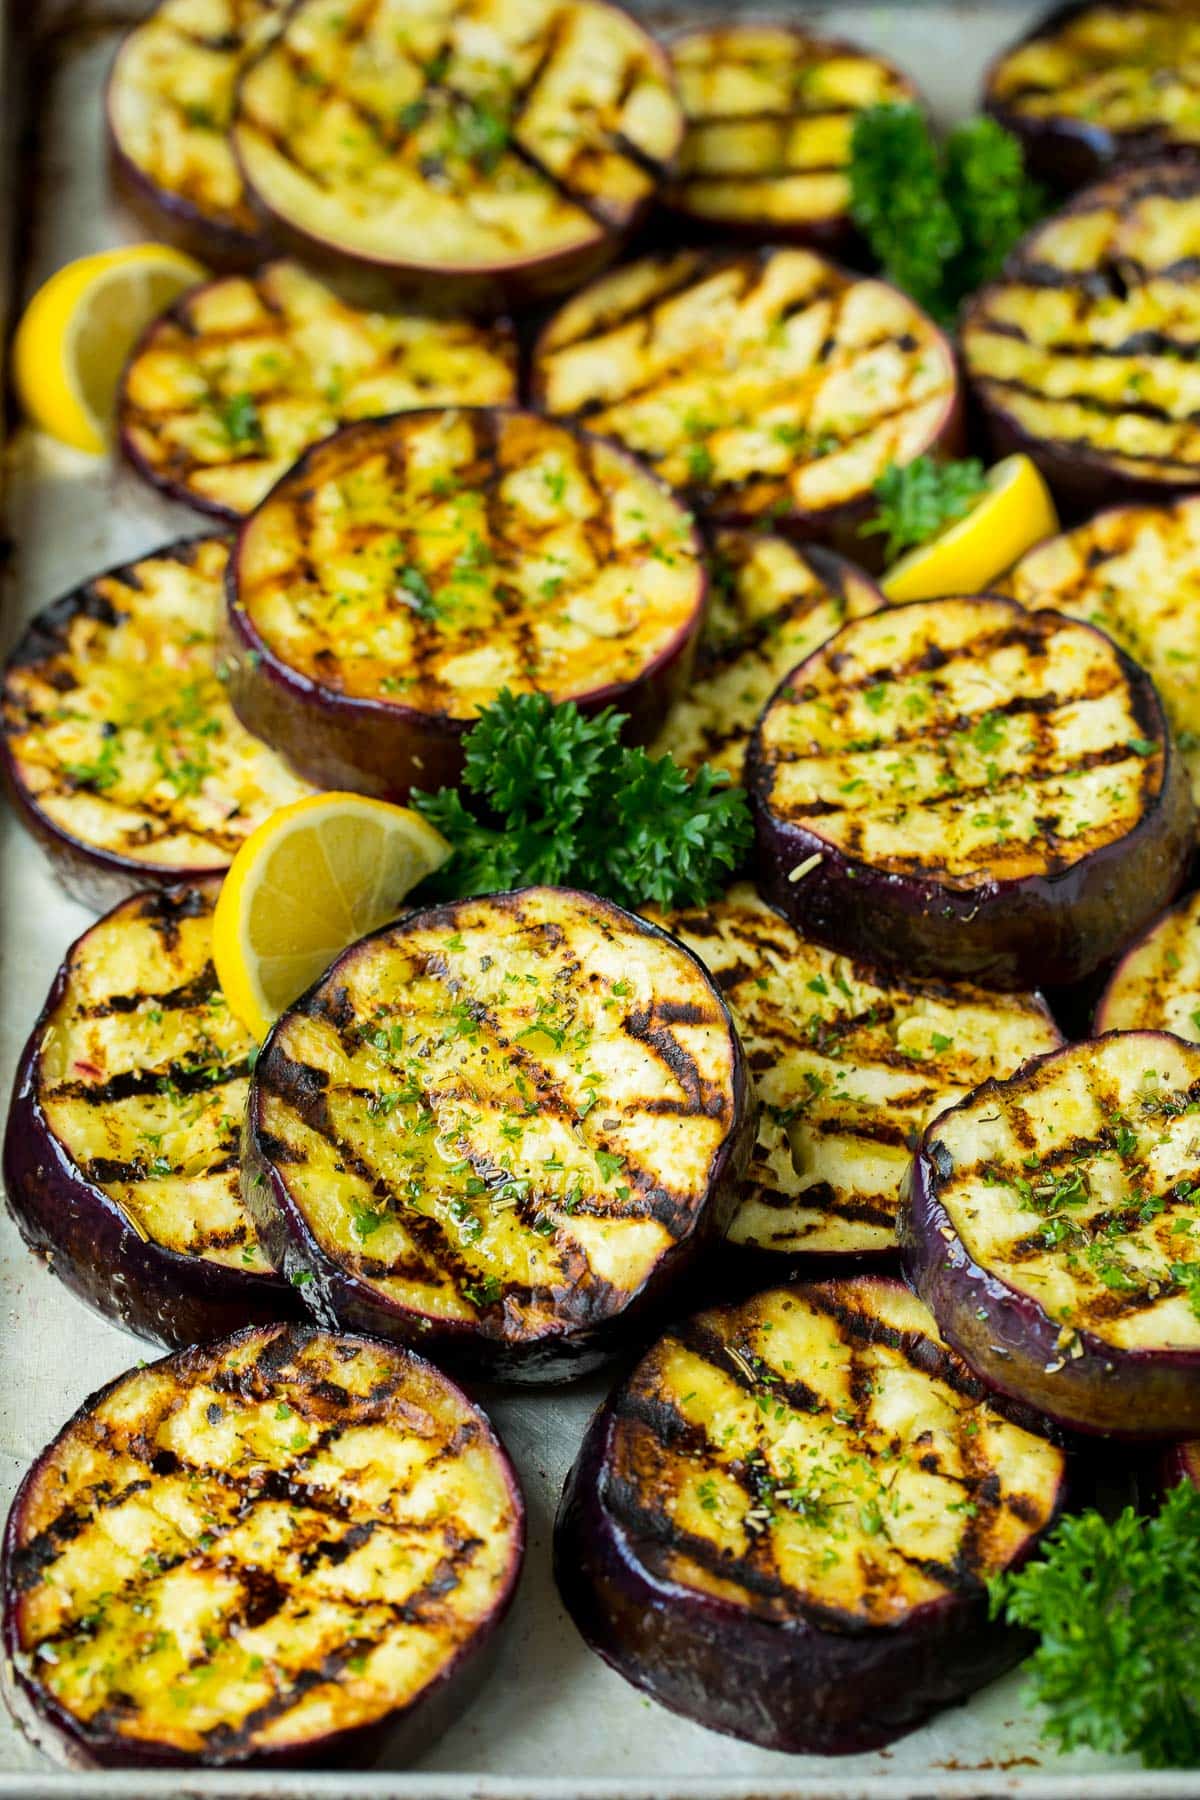 A pan of grilled eggplant slices topped with parsley.